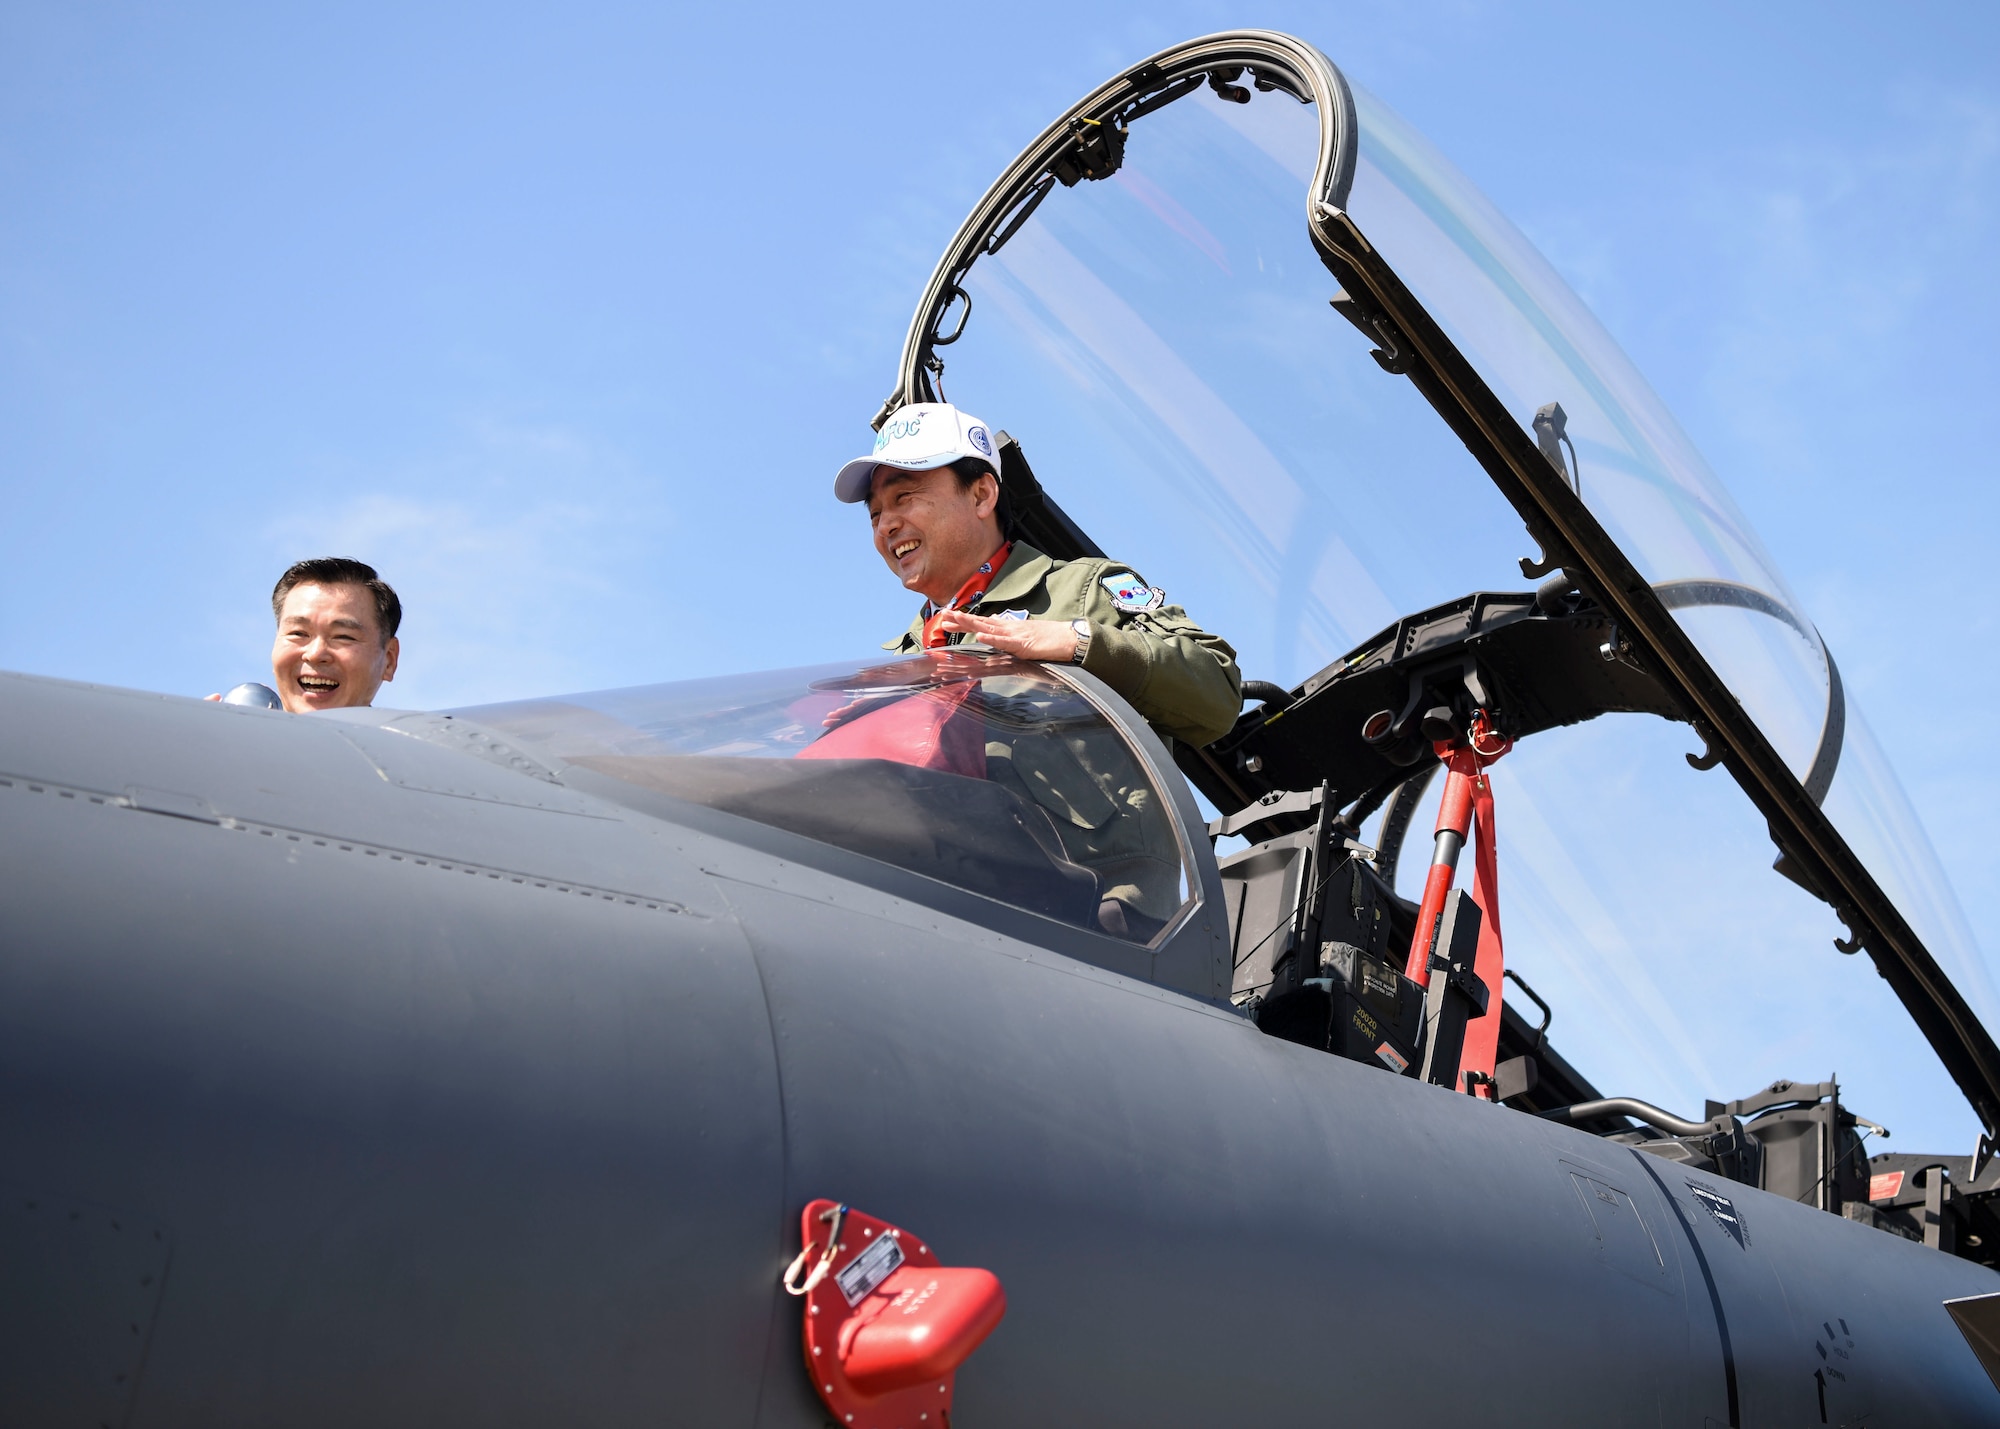 A member of the Republic of Korea National Defense Committee sits in the cockpit of a ROK Air Force F-15K Slam Eagle at Osan Air Base, ROK, Oct. 25, 2018. The NDC received a variety of ROK status reports and participated in an aircraft and munitions display tour. (U.S. Air Force photo by Airman 1st Class Ilyana A. Escalona)